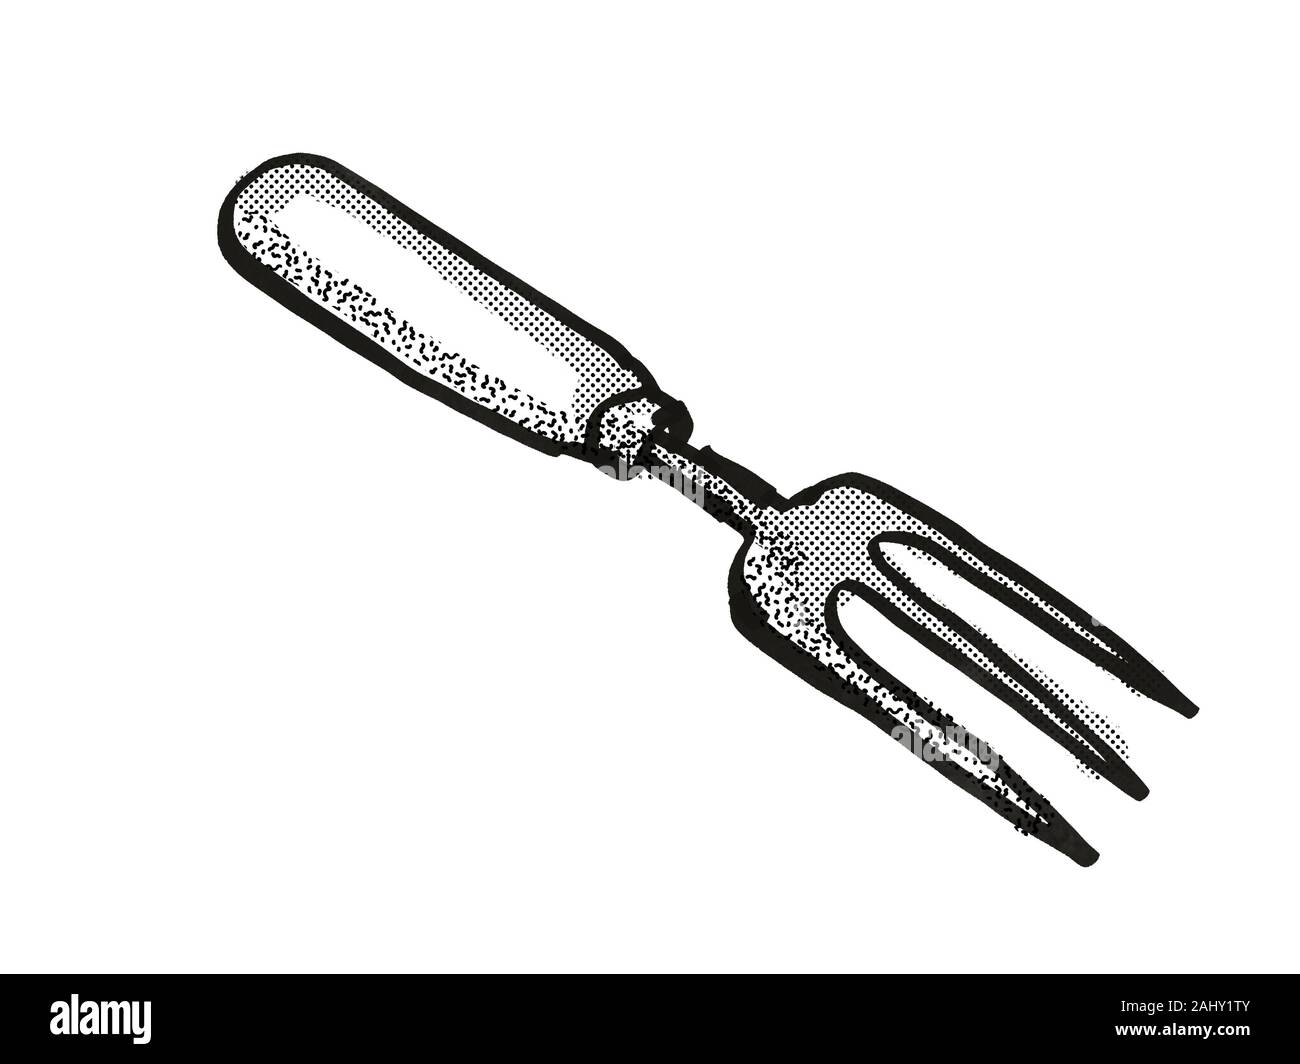 Retro cartoon style drawing of a hand fork , a garden or gardening tool  equipment on isolated white background done in black and white Stock Photo  - Alamy